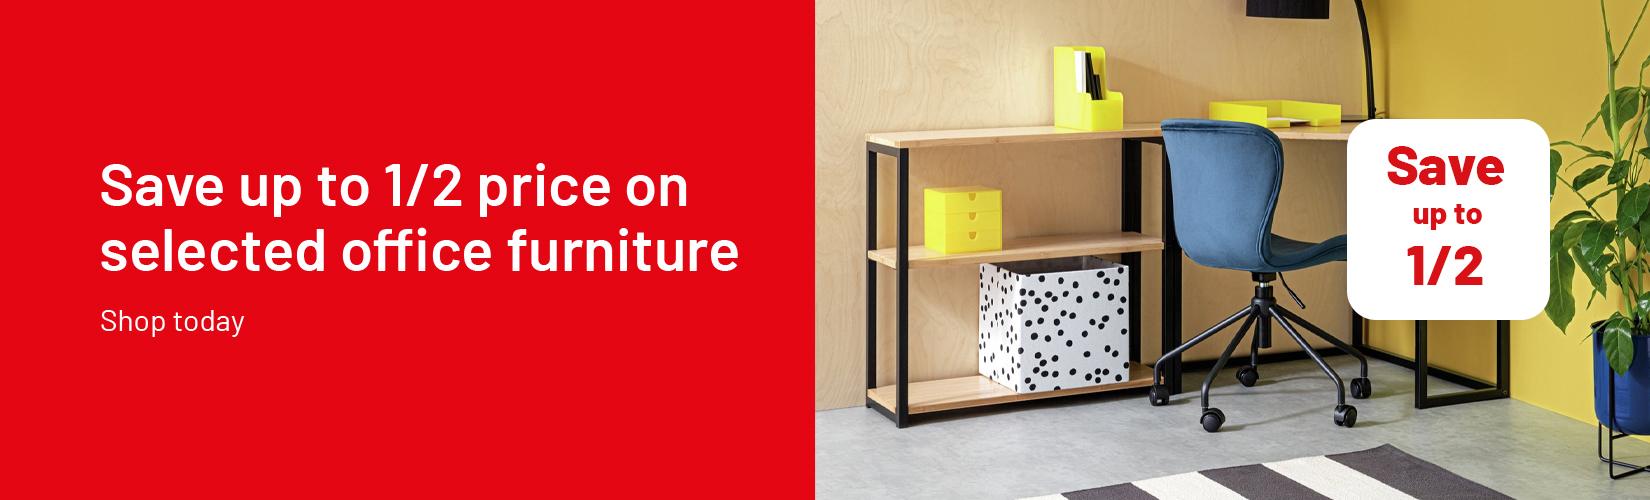 Save up to 1/2 price on selected office furniture.